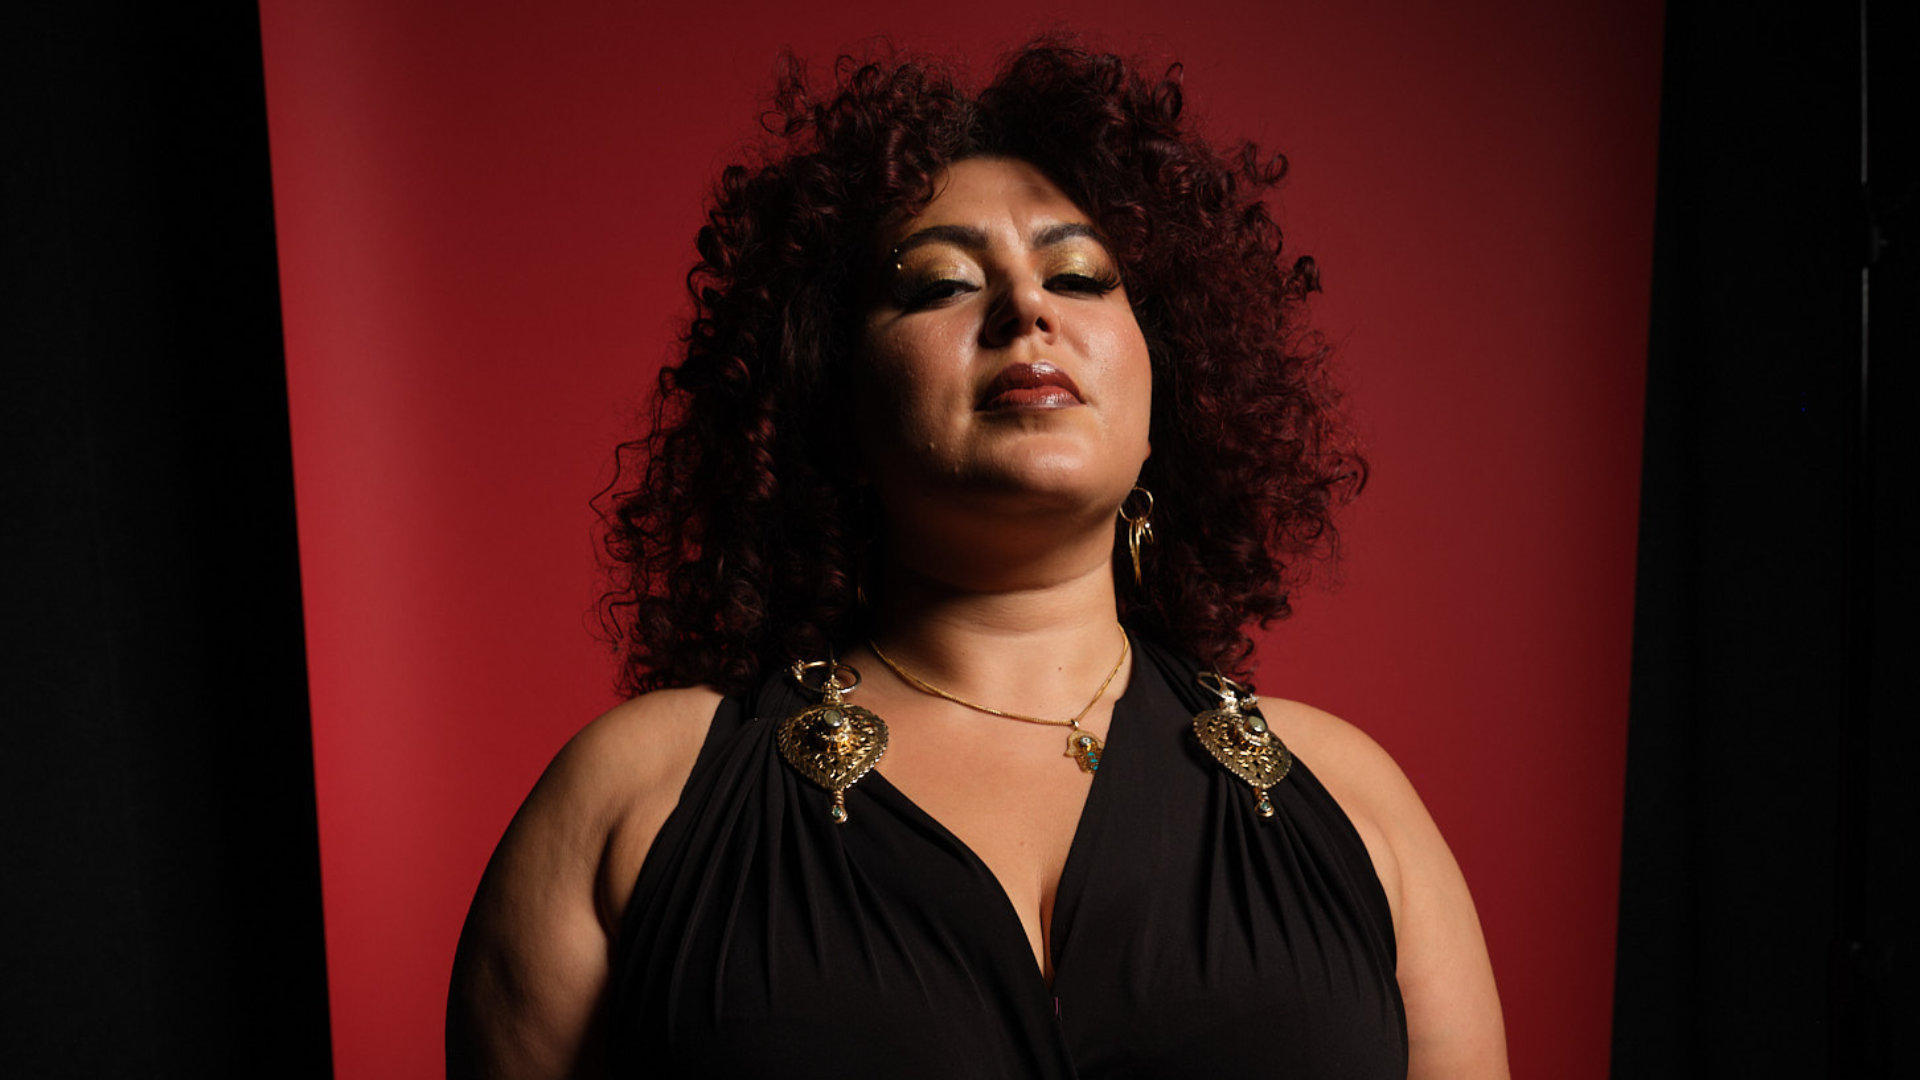 image of performer, black and red background, north african woman with curly hair to shoulders wearing a black top